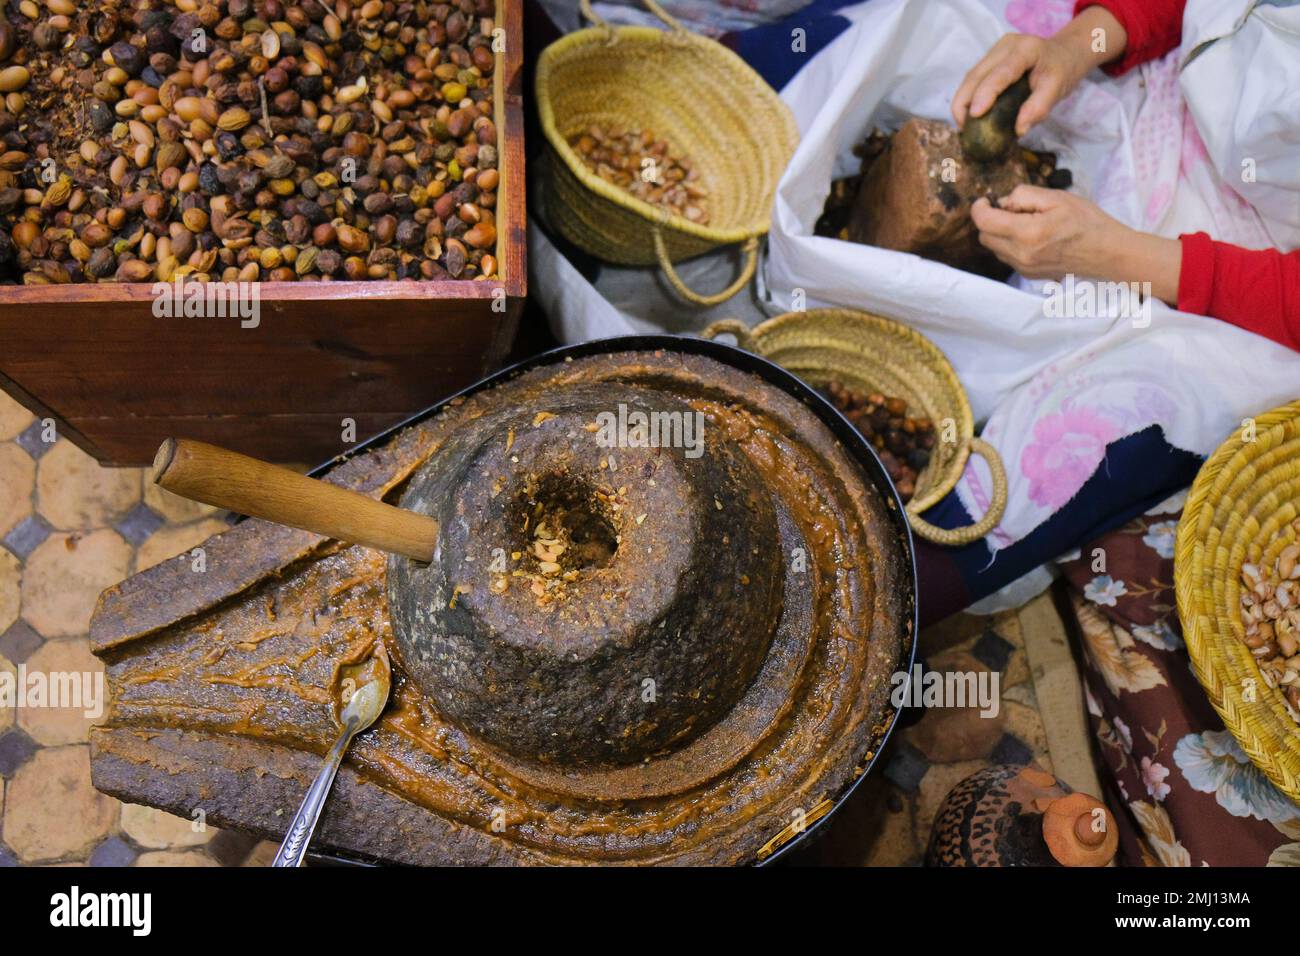 Fez, Morocco - top view of Argan oil stone handmill, box with seeds, female hands pounding nuts. Labor-intensive production with traditional grinder. Stock Photo